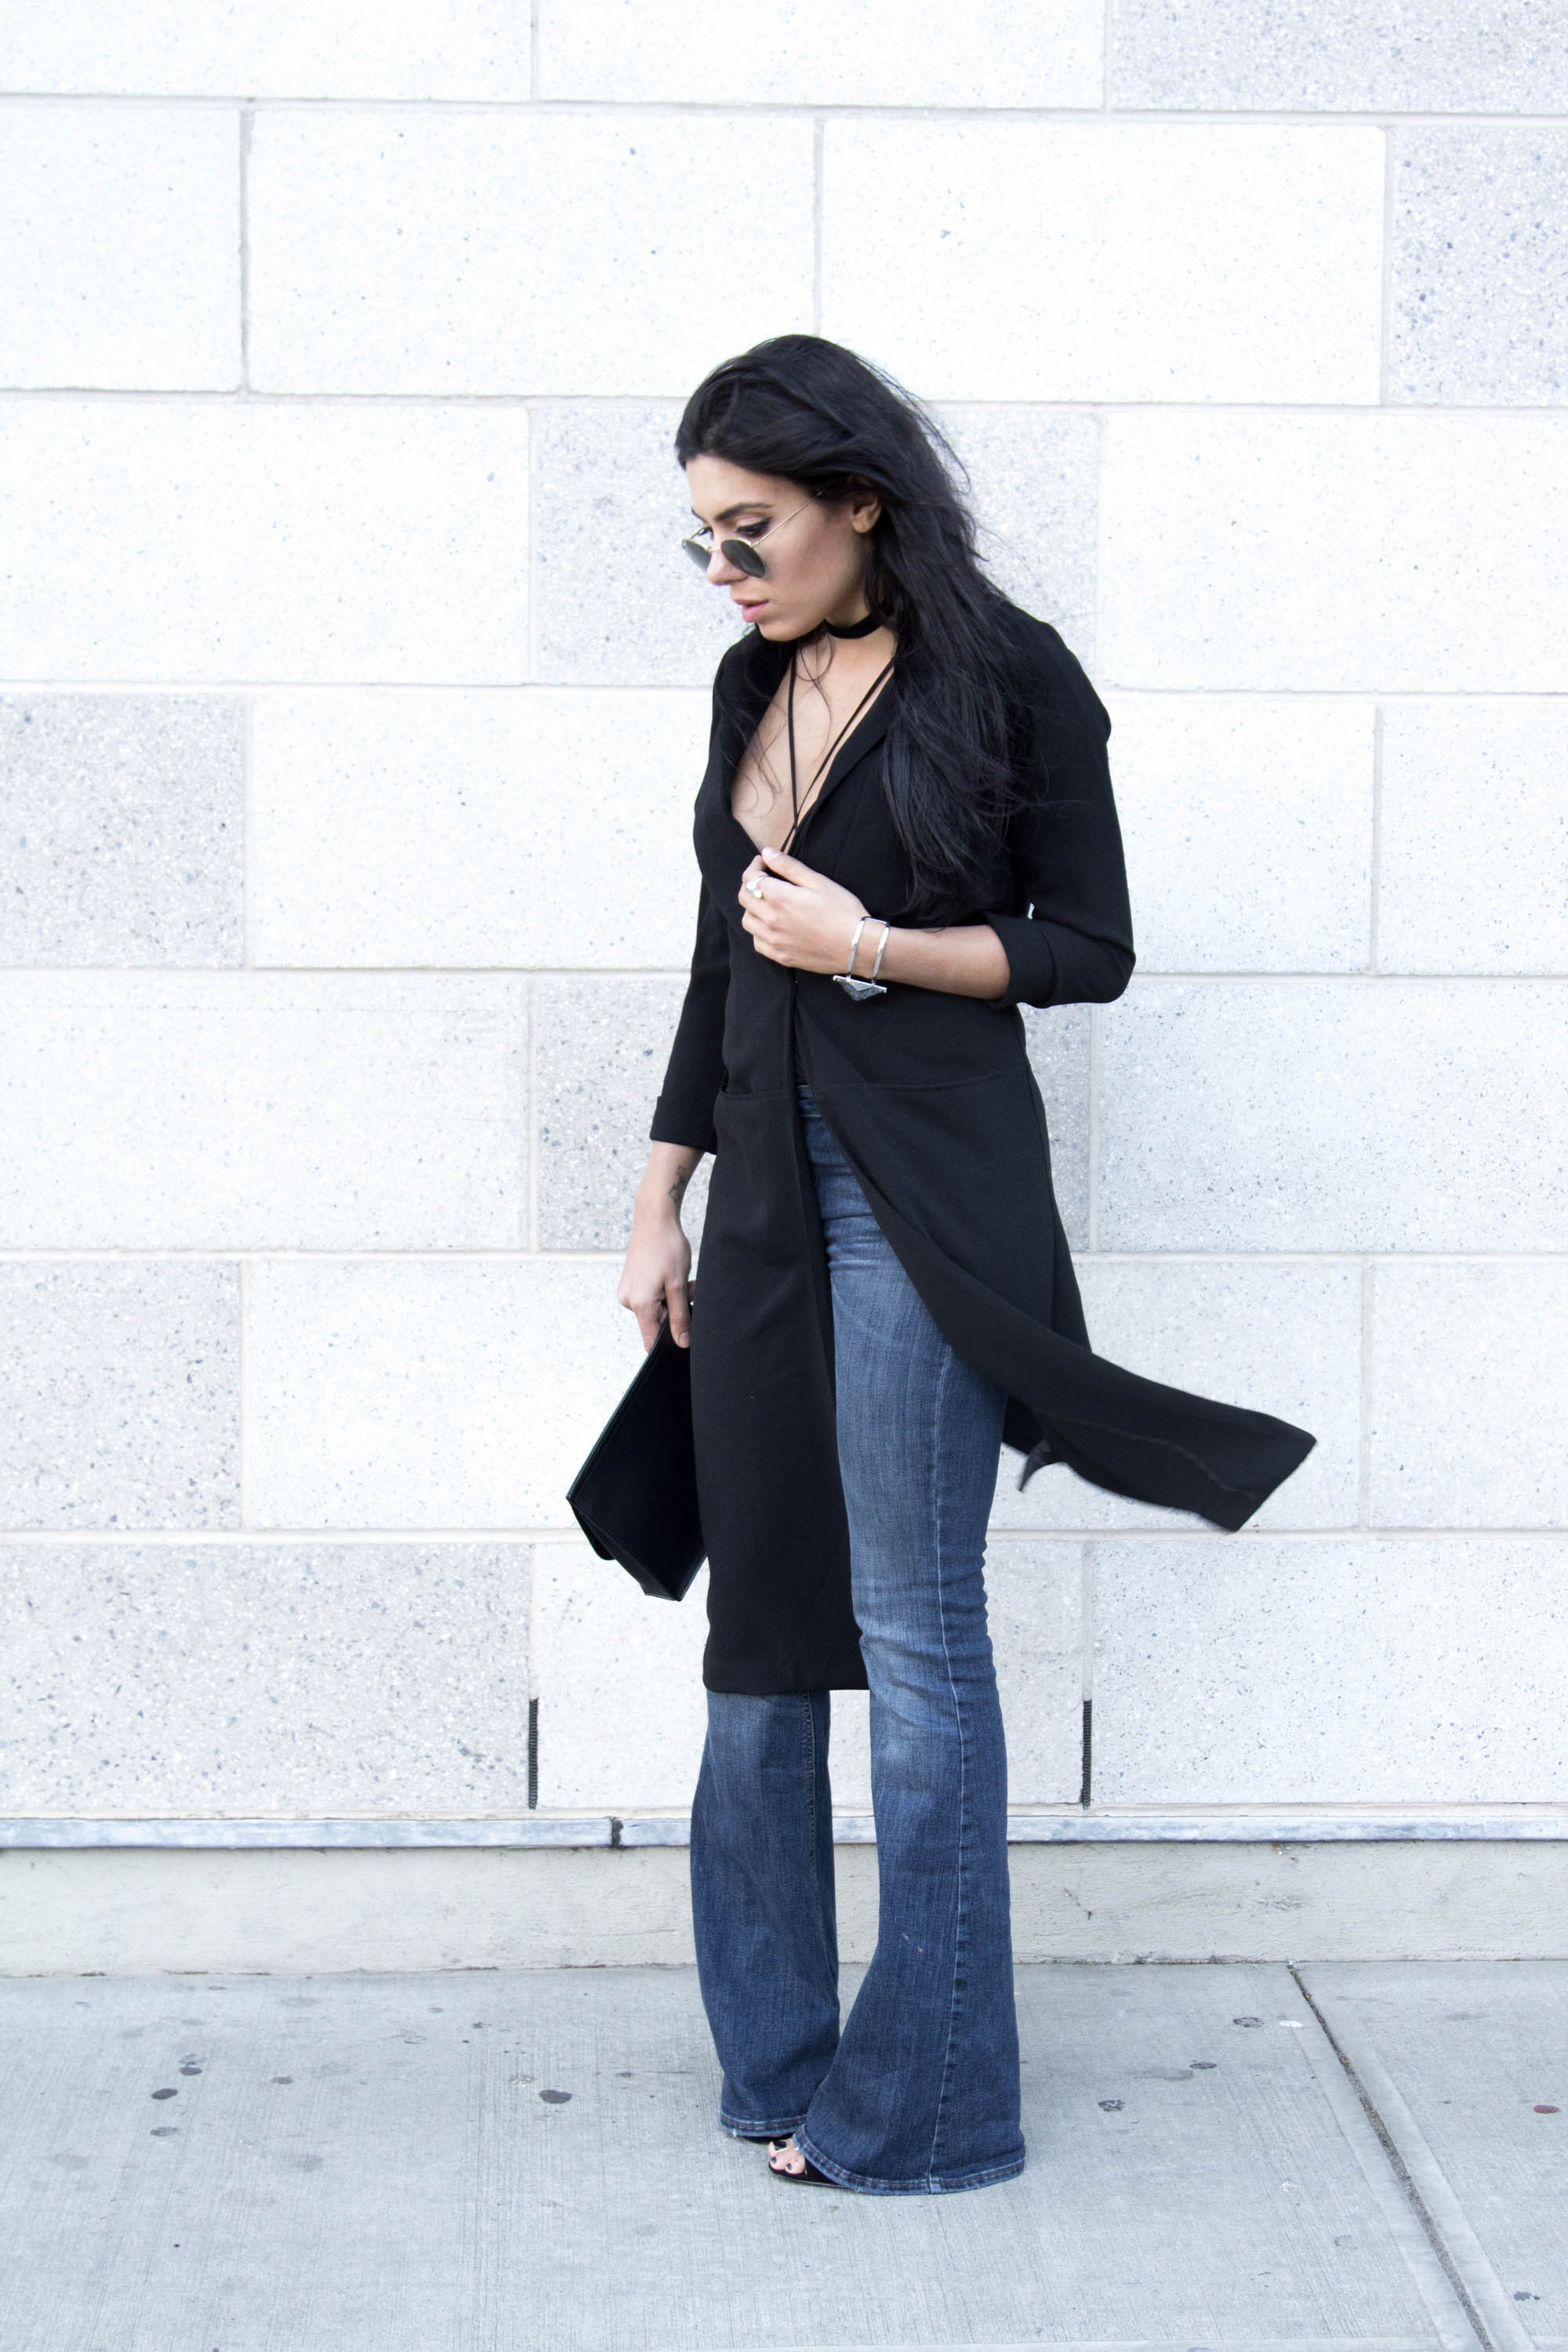 Black light coat with flared jeans